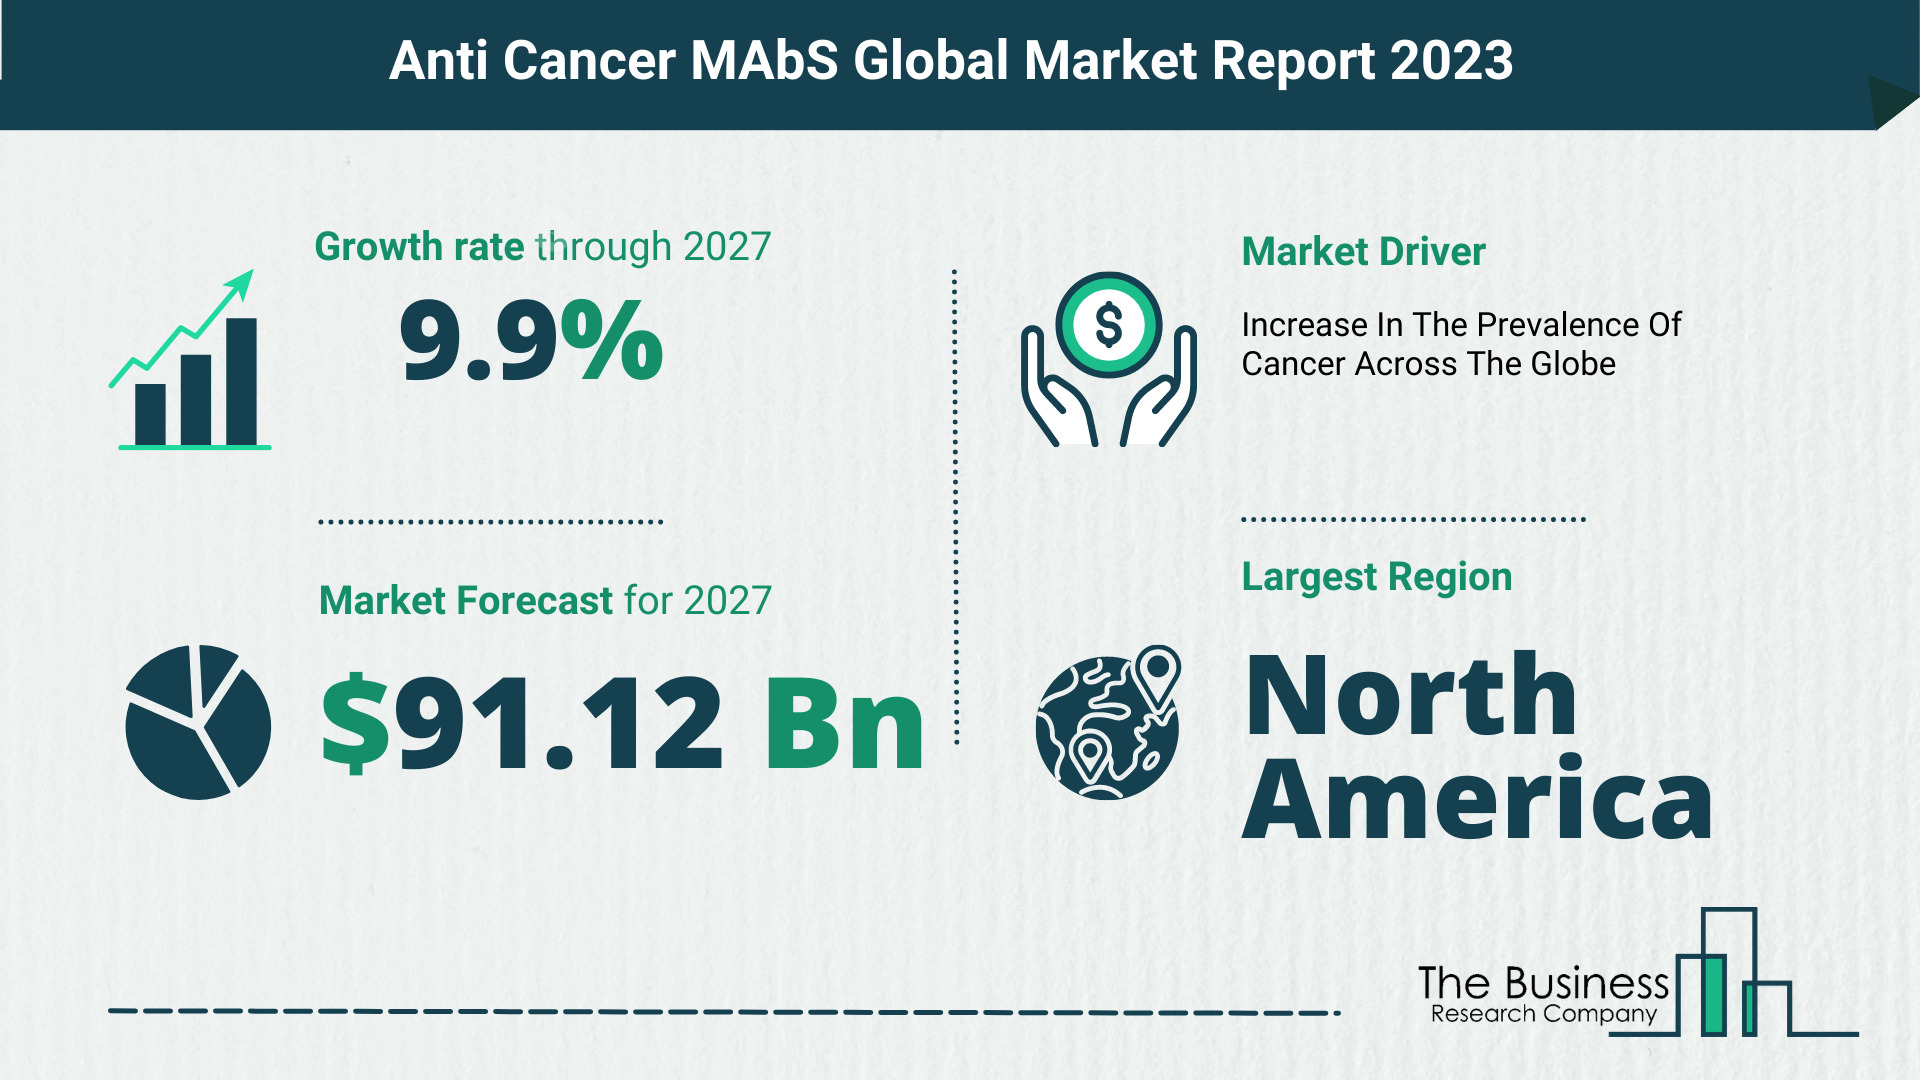 How Will The Anti Cancer MAbS Market Globally Expand In 2023?